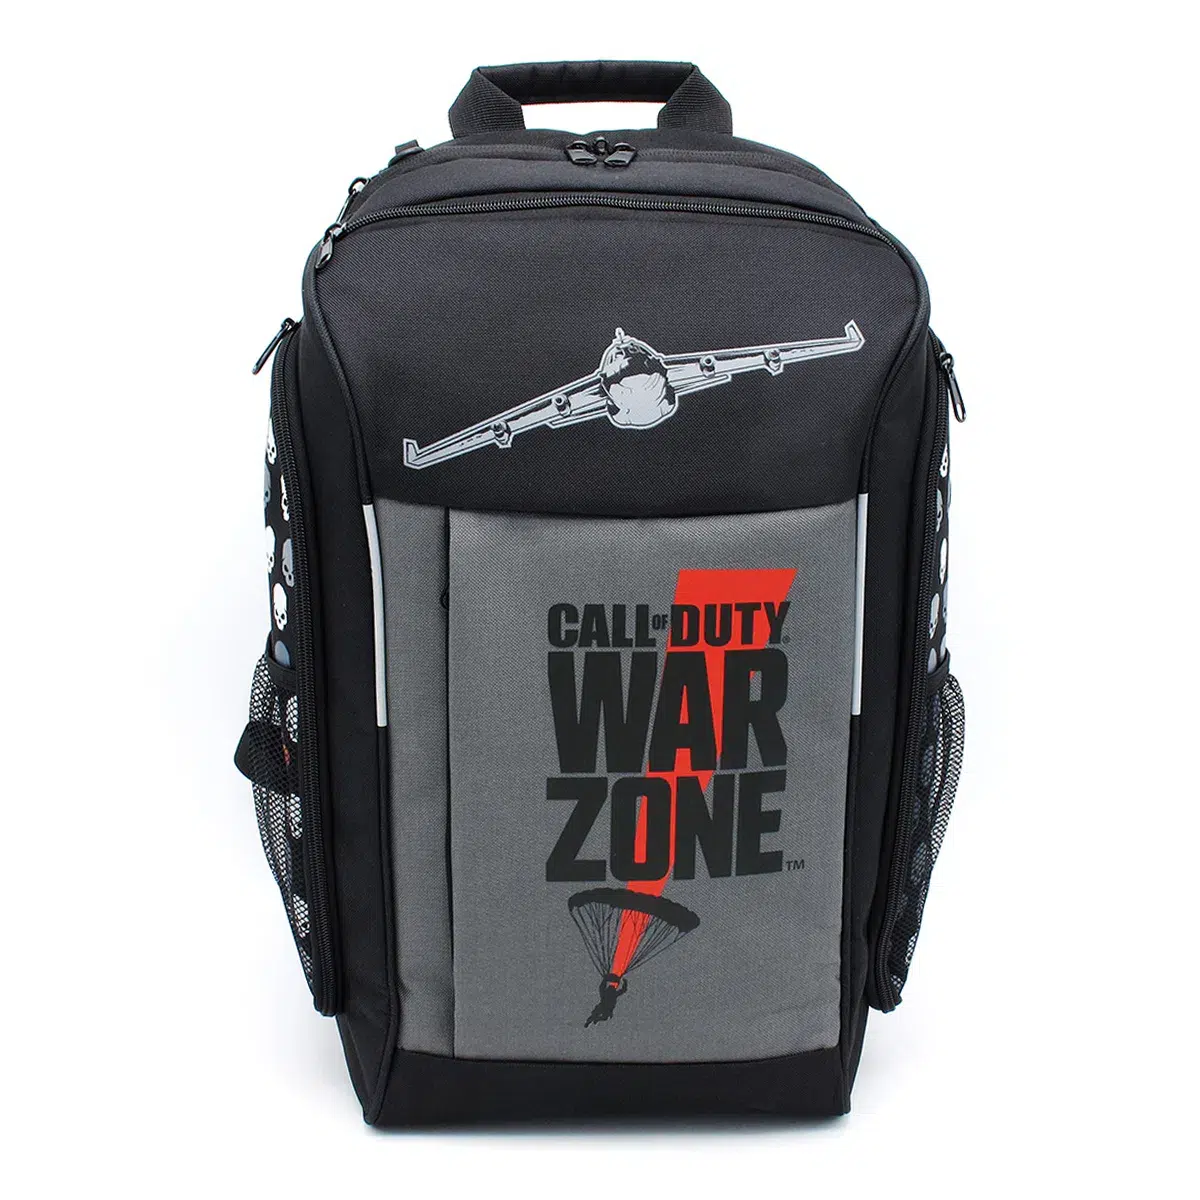 Call of Duty Warzone Backpack "Parachute"